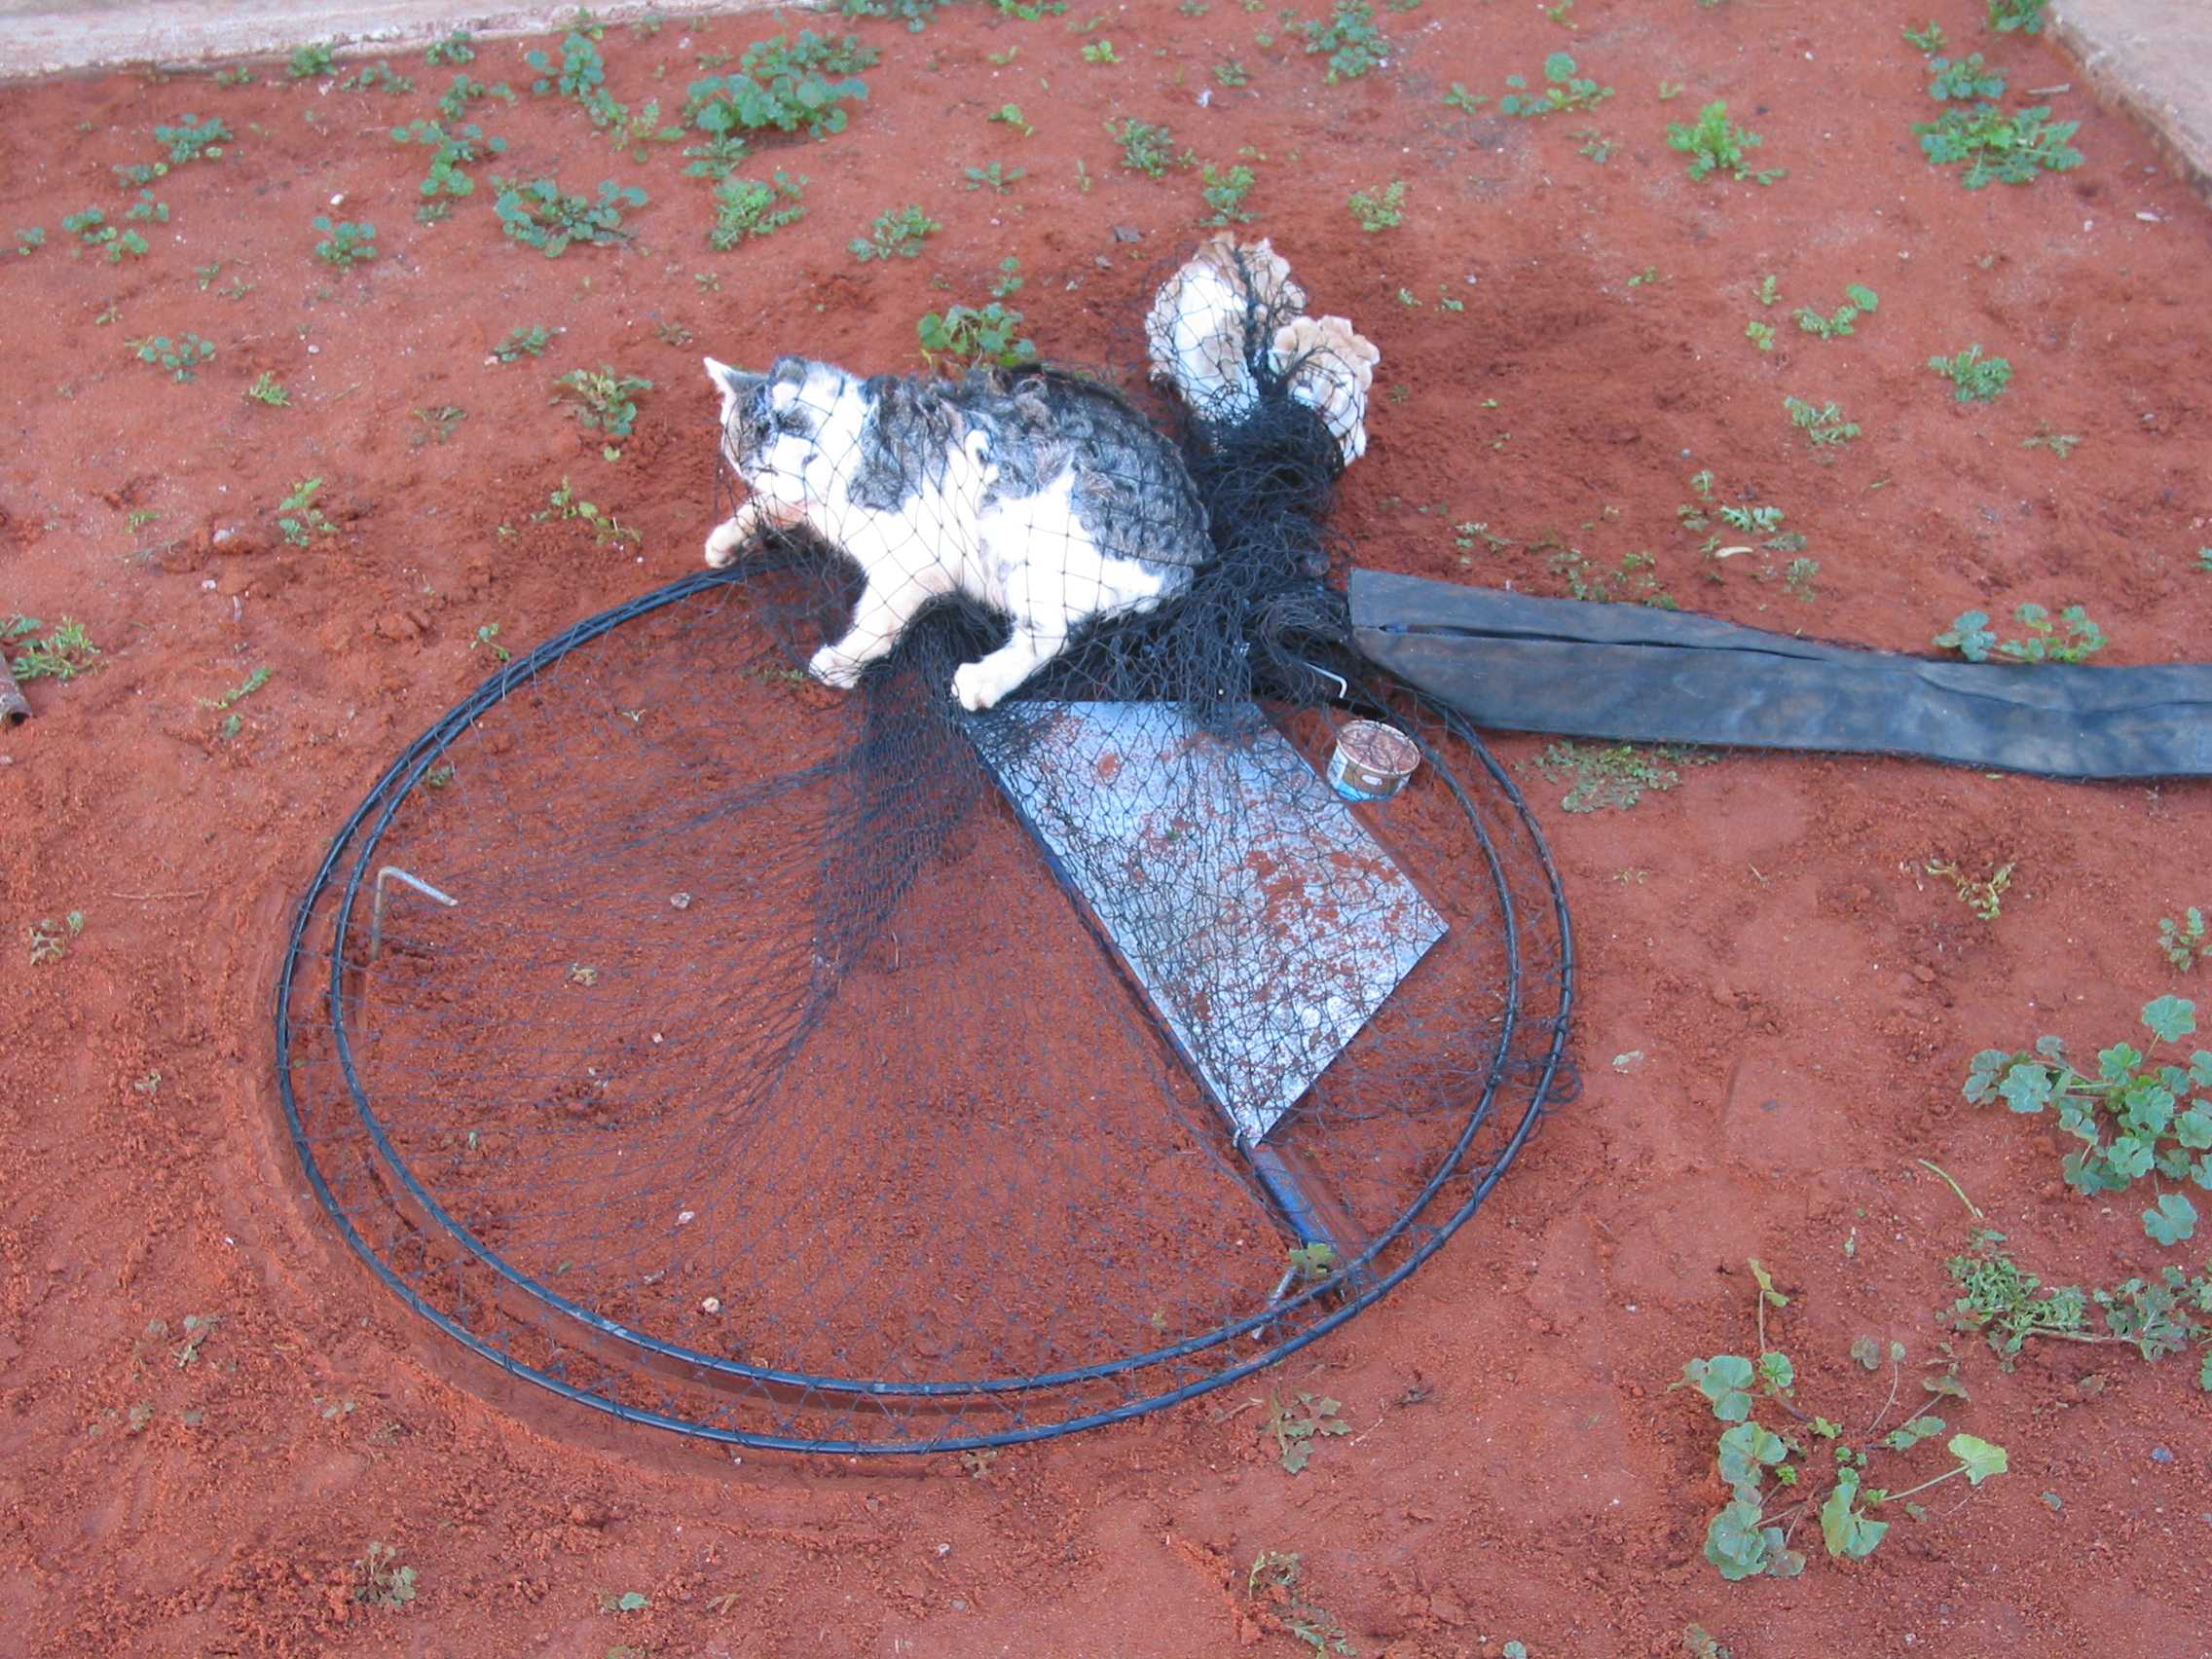 Trapping of feral cats